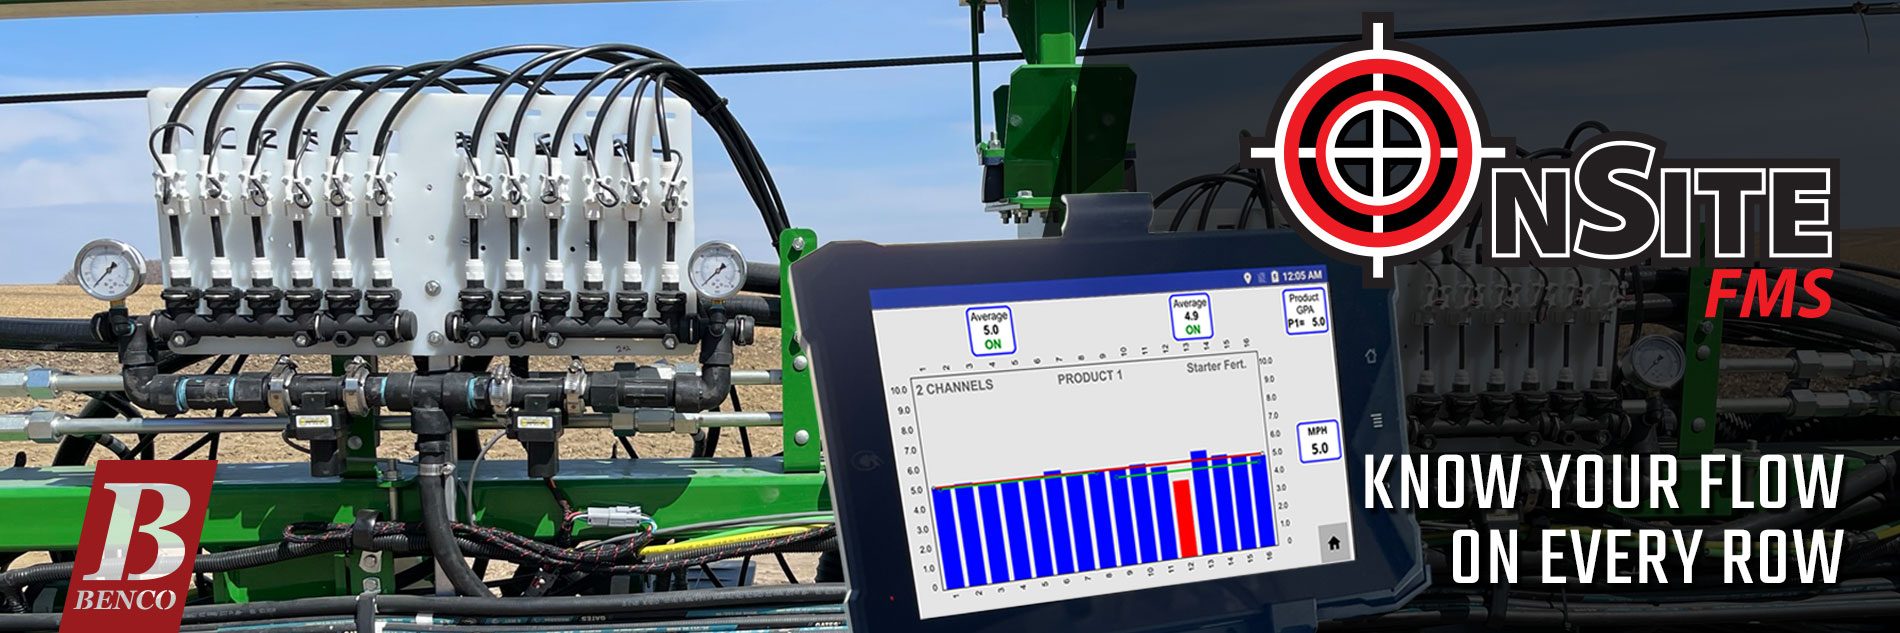 OnSite FMS monitor fertilizer flow from the cab